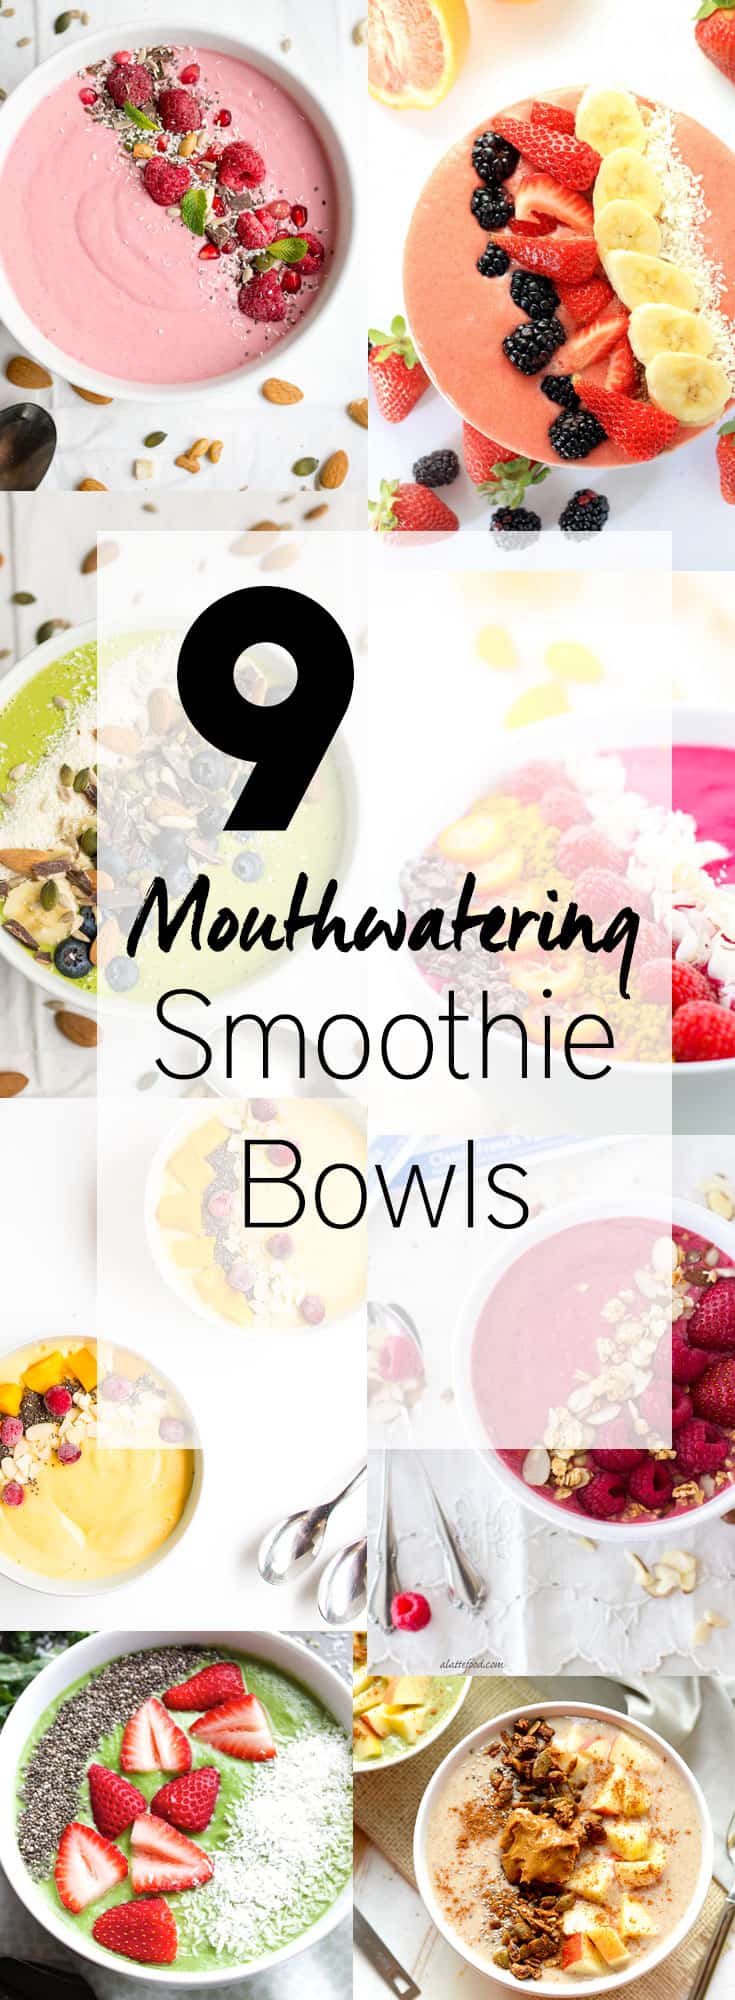 9 Mouthwatering Smoothie Bowls - 9 Easy smoothie bowl recipes that will have you drooling. Not only are they beautiful and delicious but also packed with healthy ingredients.